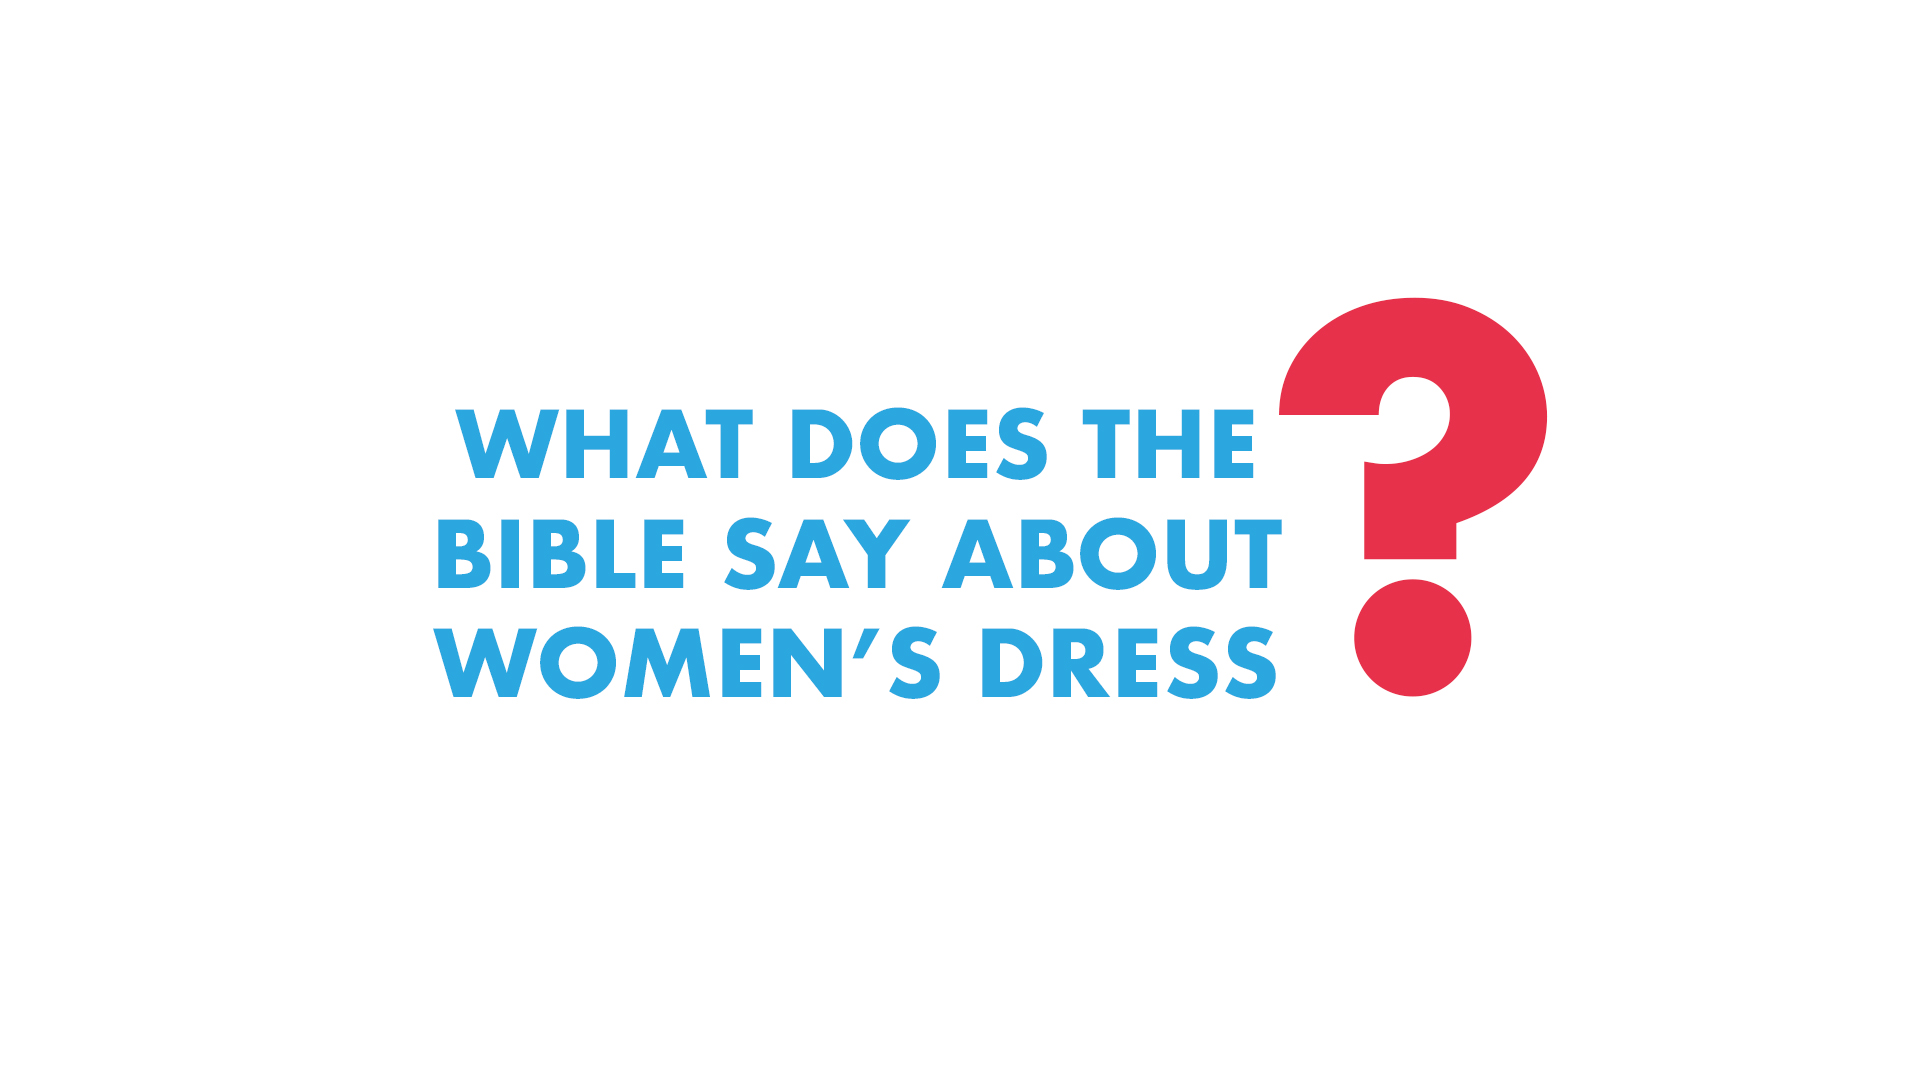 What does the Bible say about Women’s Dress?